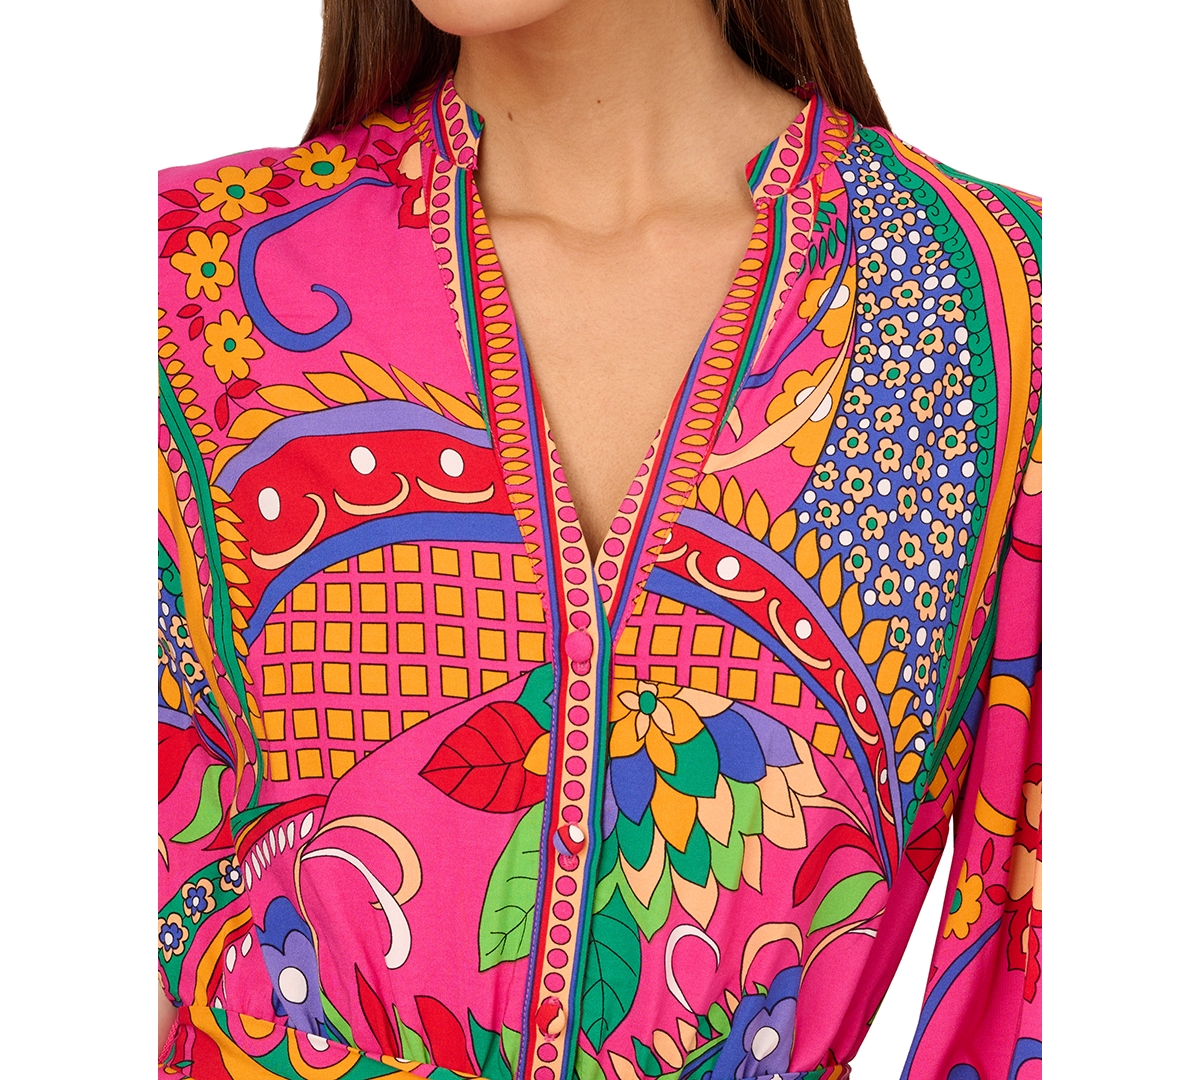 Shop Adrianna By Adrianna Papell Women's Printed Shirtdress In Pink Multi